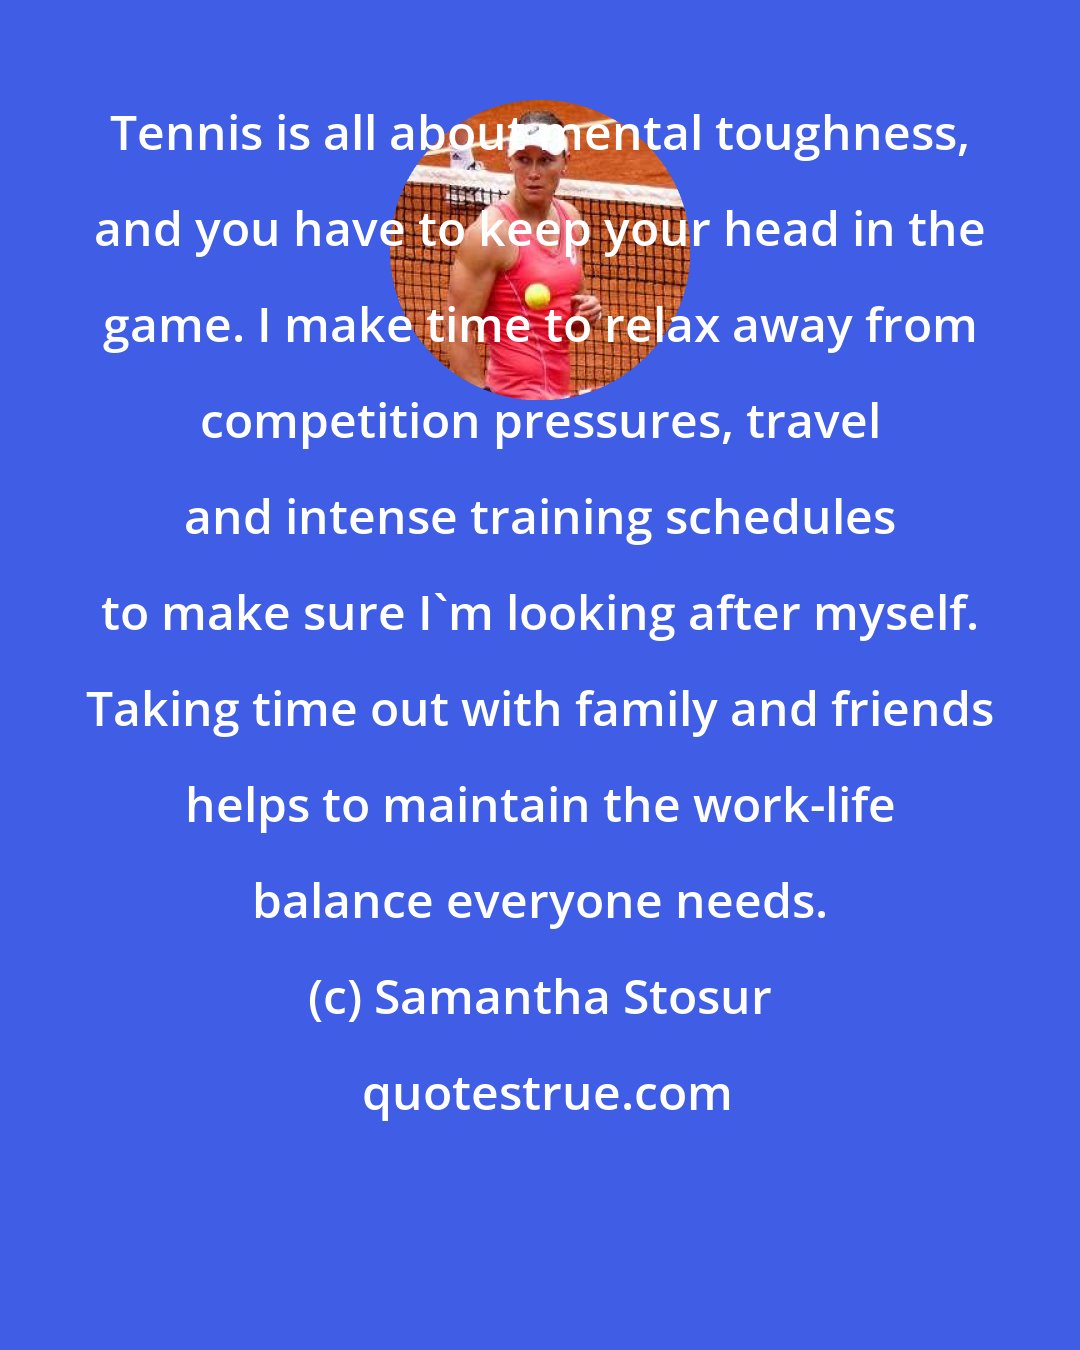 Samantha Stosur: Tennis is all about mental toughness, and you have to keep your head in the game. I make time to relax away from competition pressures, travel and intense training schedules to make sure I'm looking after myself. Taking time out with family and friends helps to maintain the work-life balance everyone needs.